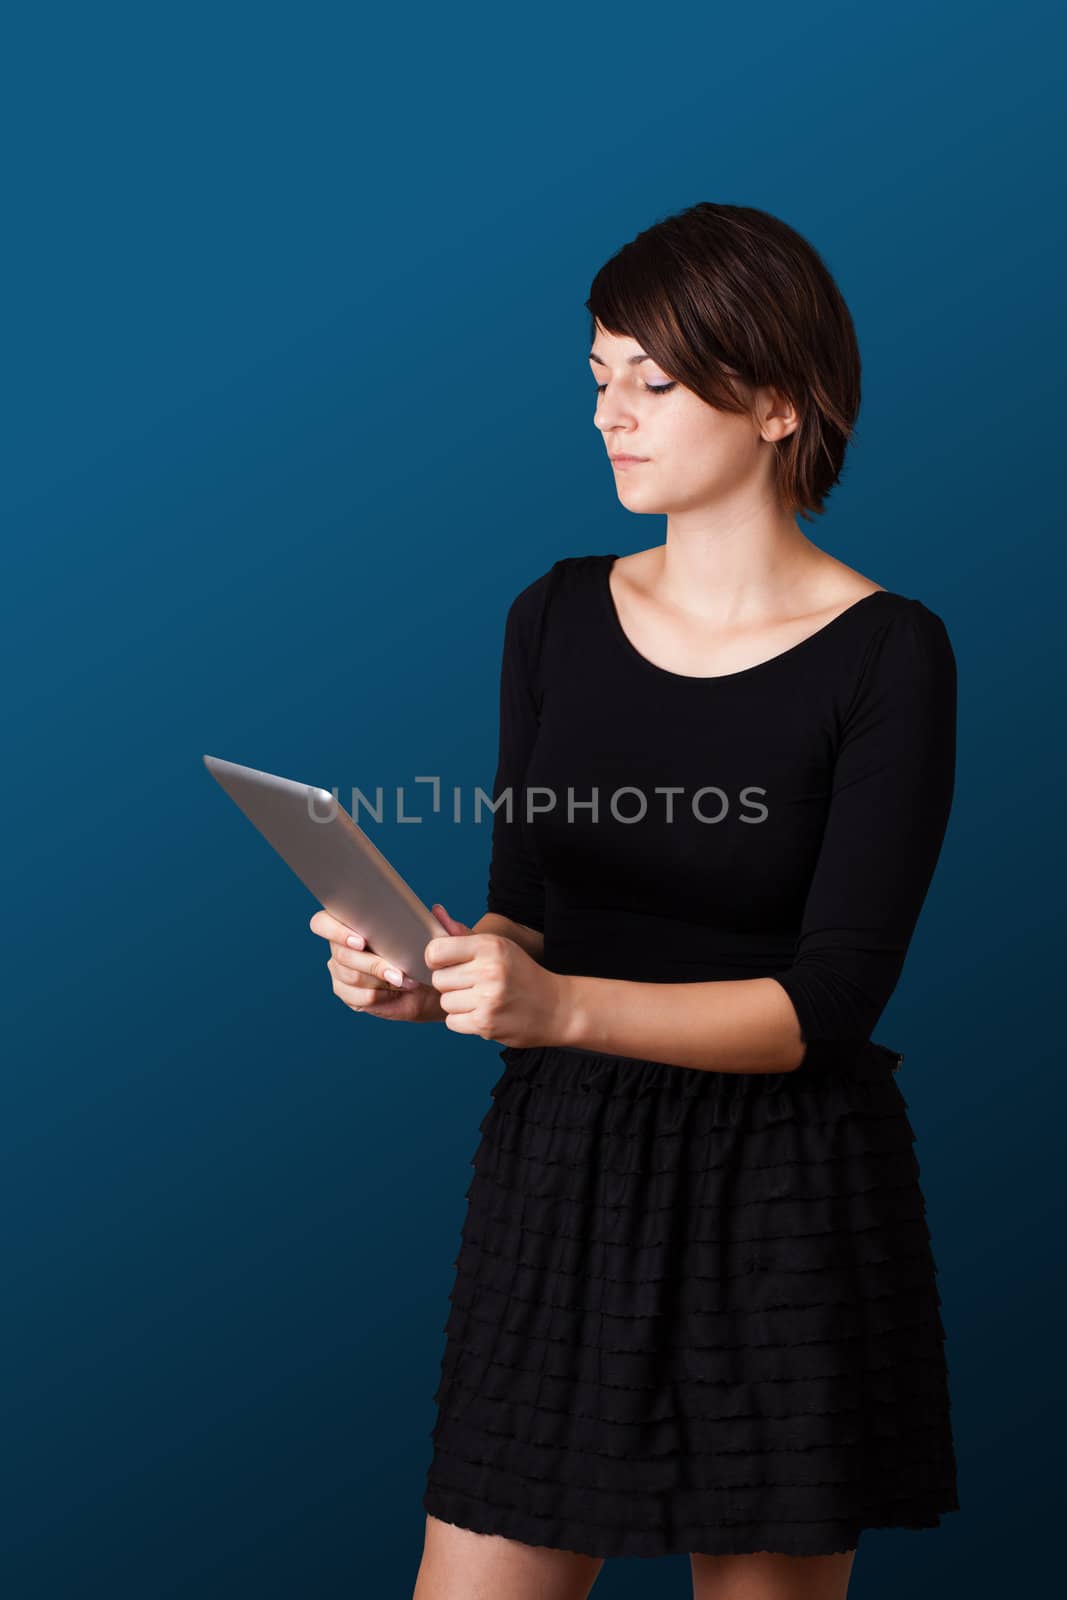 Young business woman looking at modern tablet 